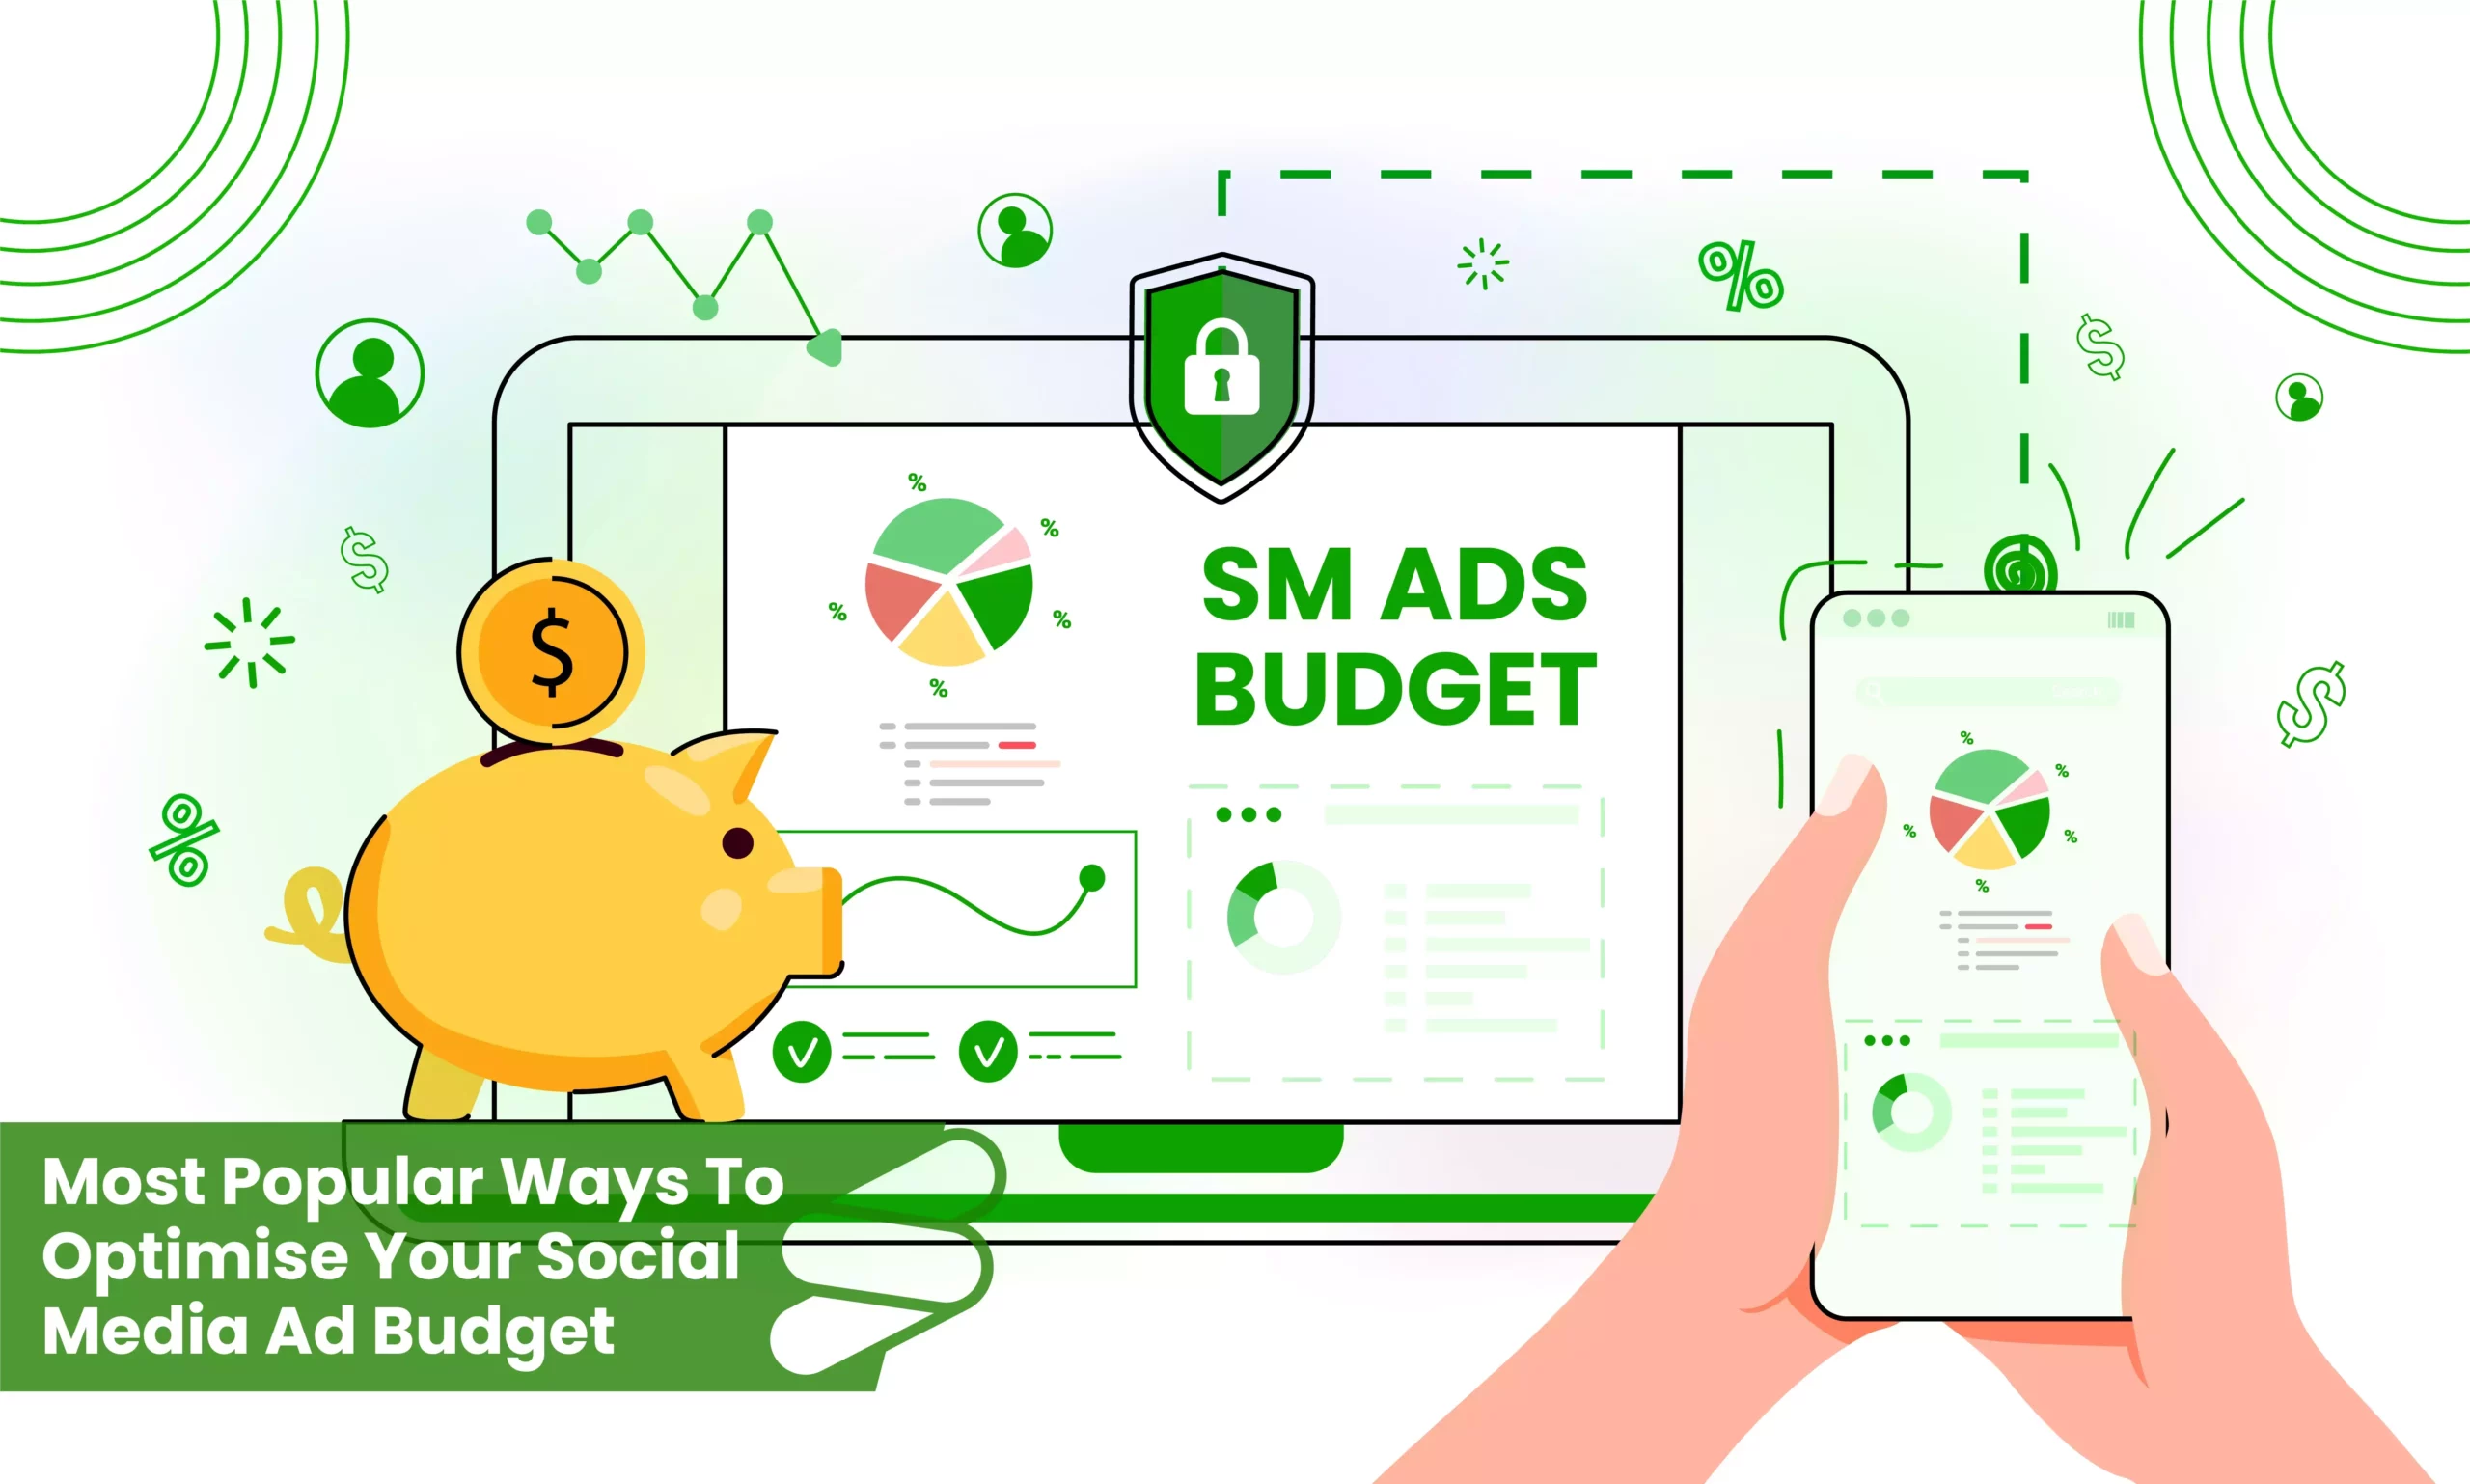 The 10 most popular Ways to Optimise Your Social Media Ad Budget